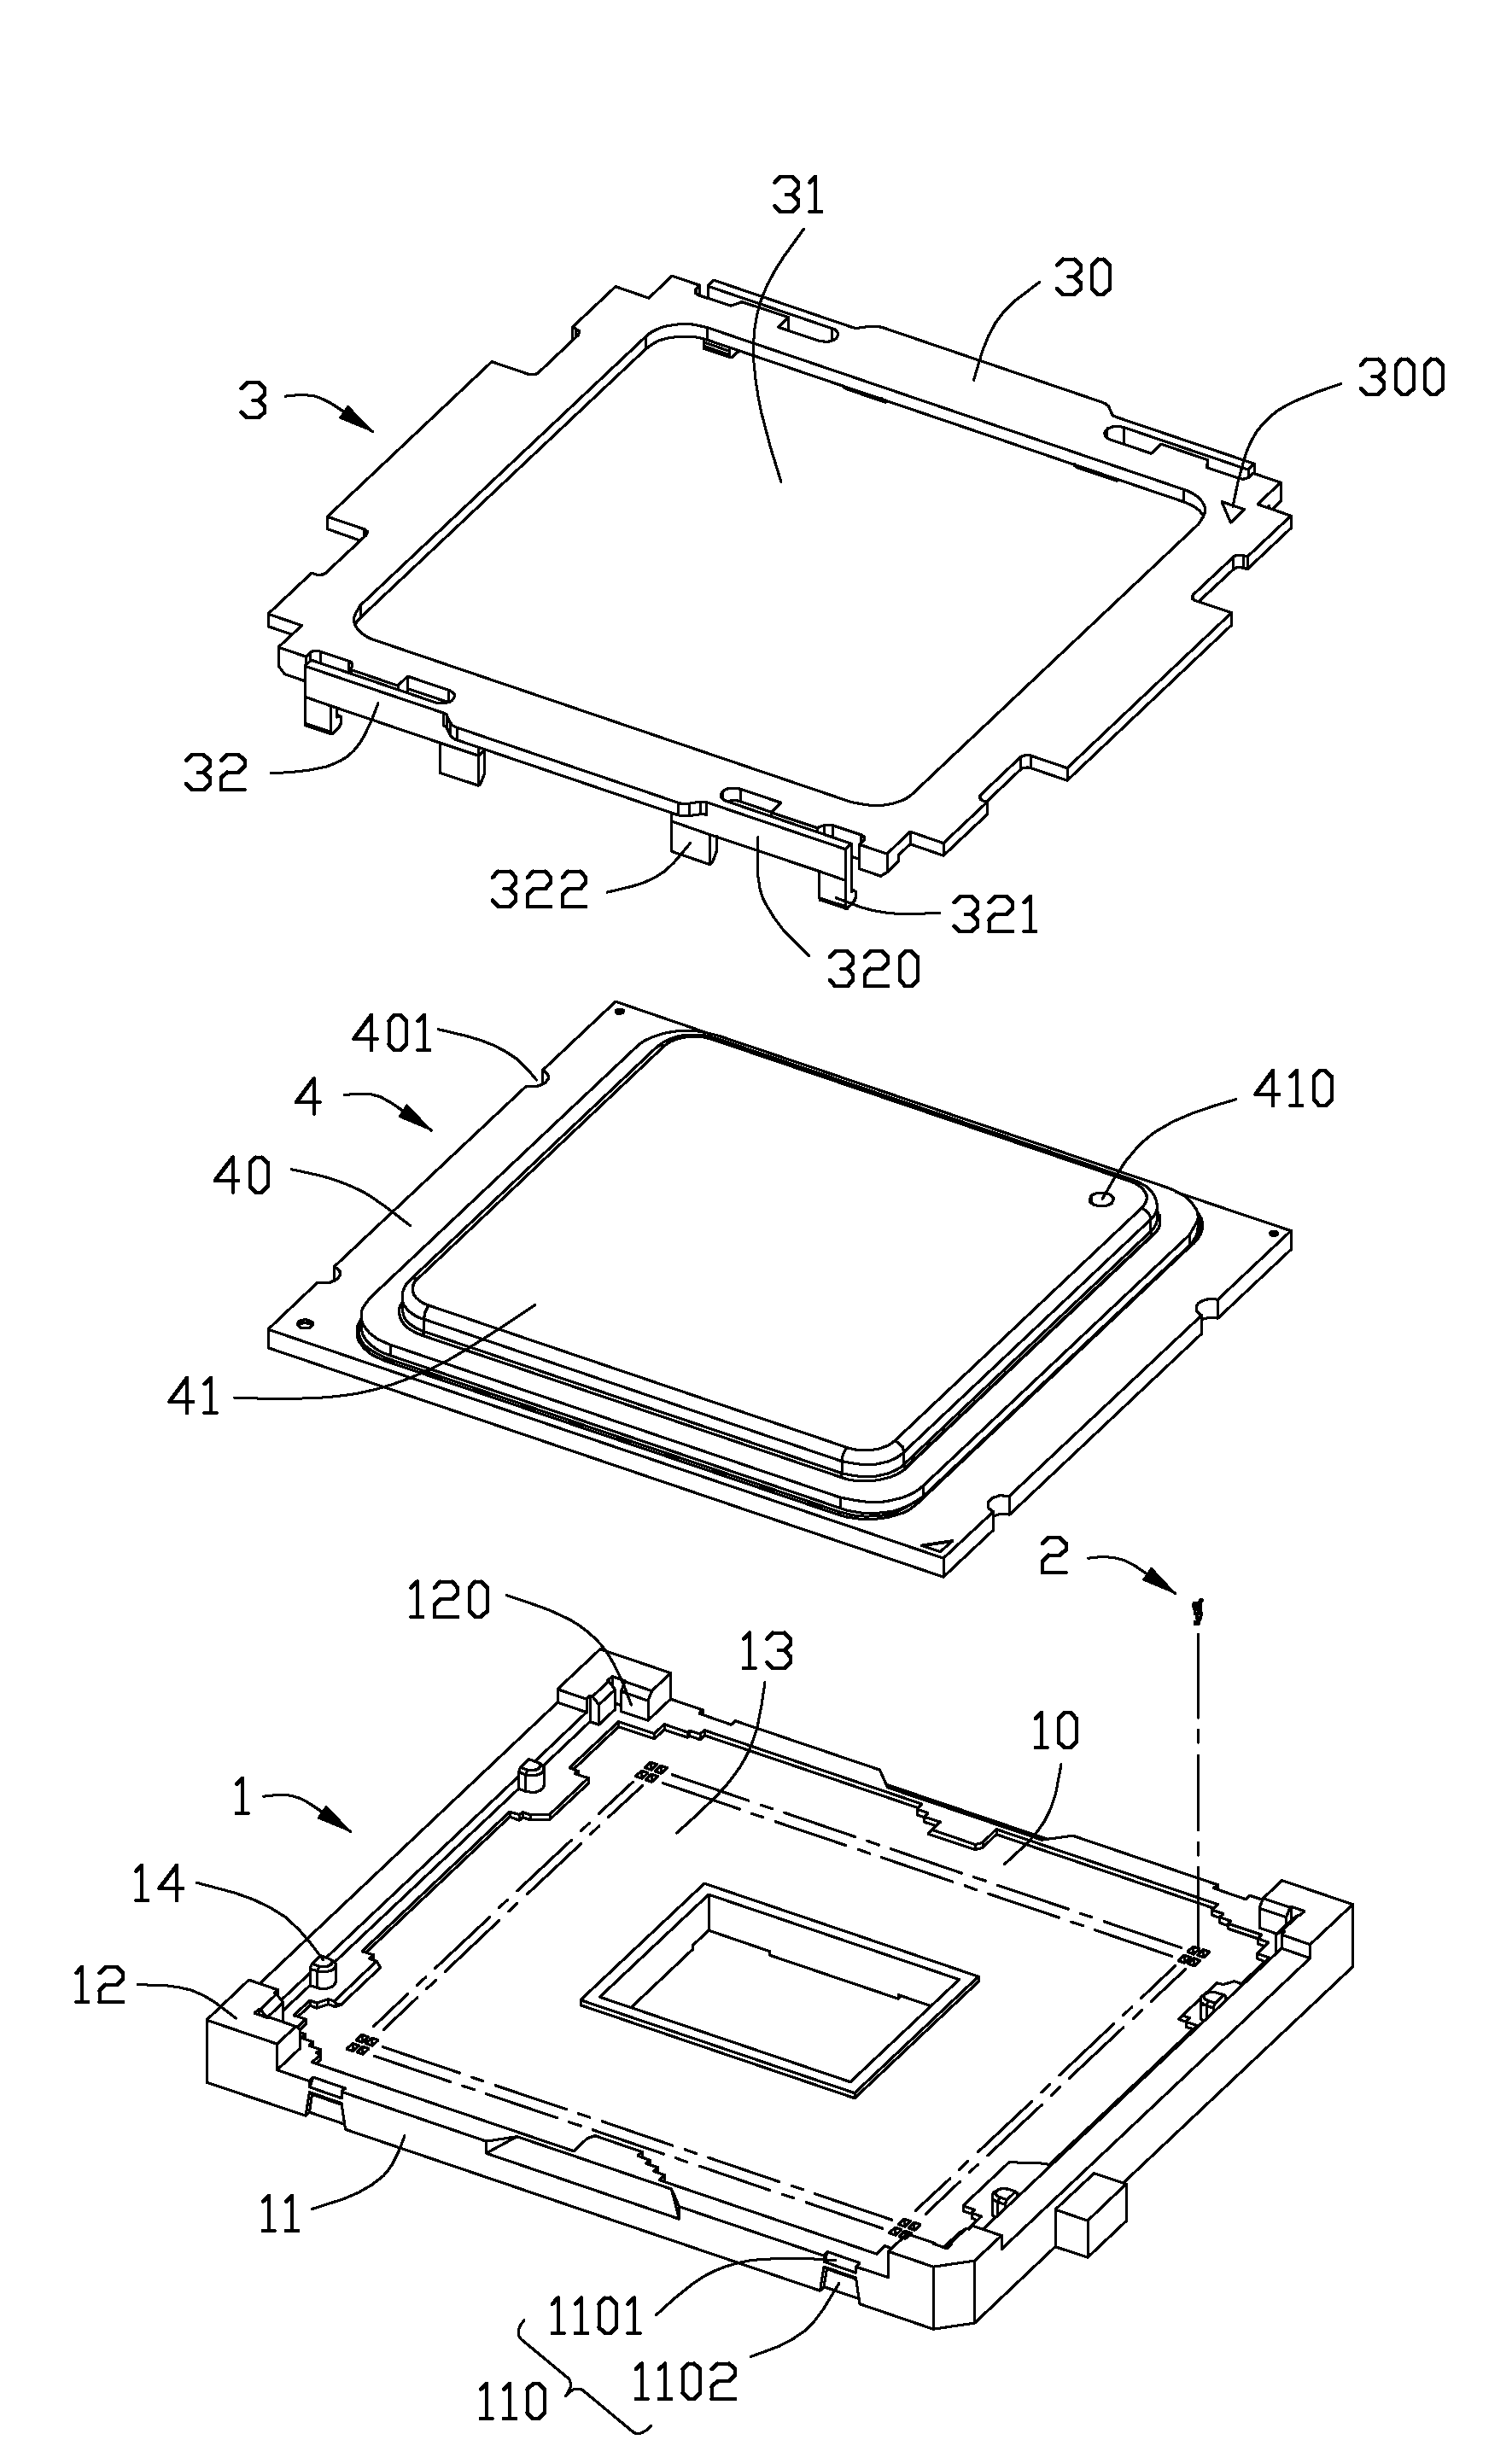 Electrical connector with carrier frame loading electronic package